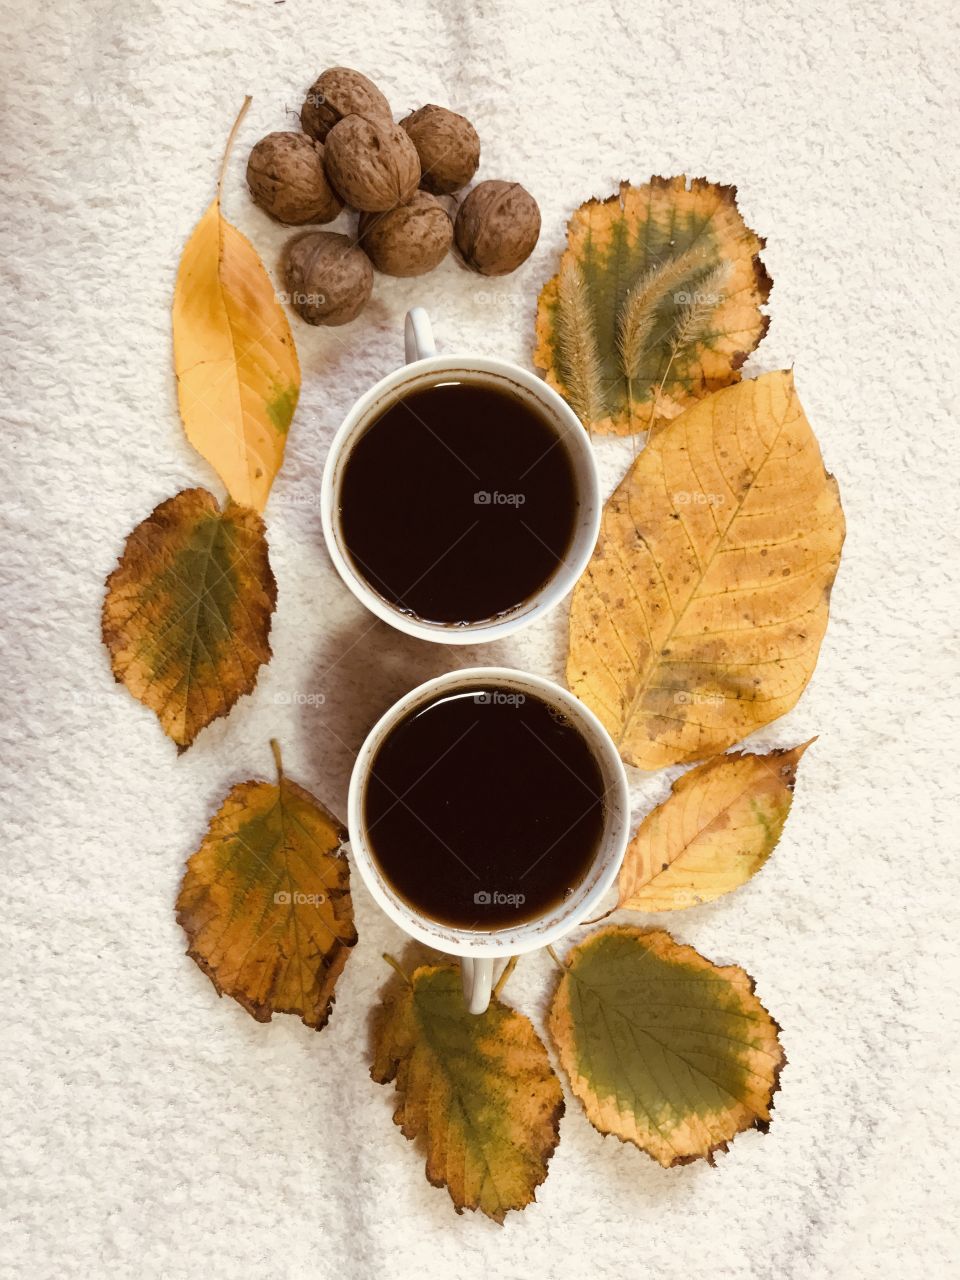 The two white cups of coffee in the autumn vibes.